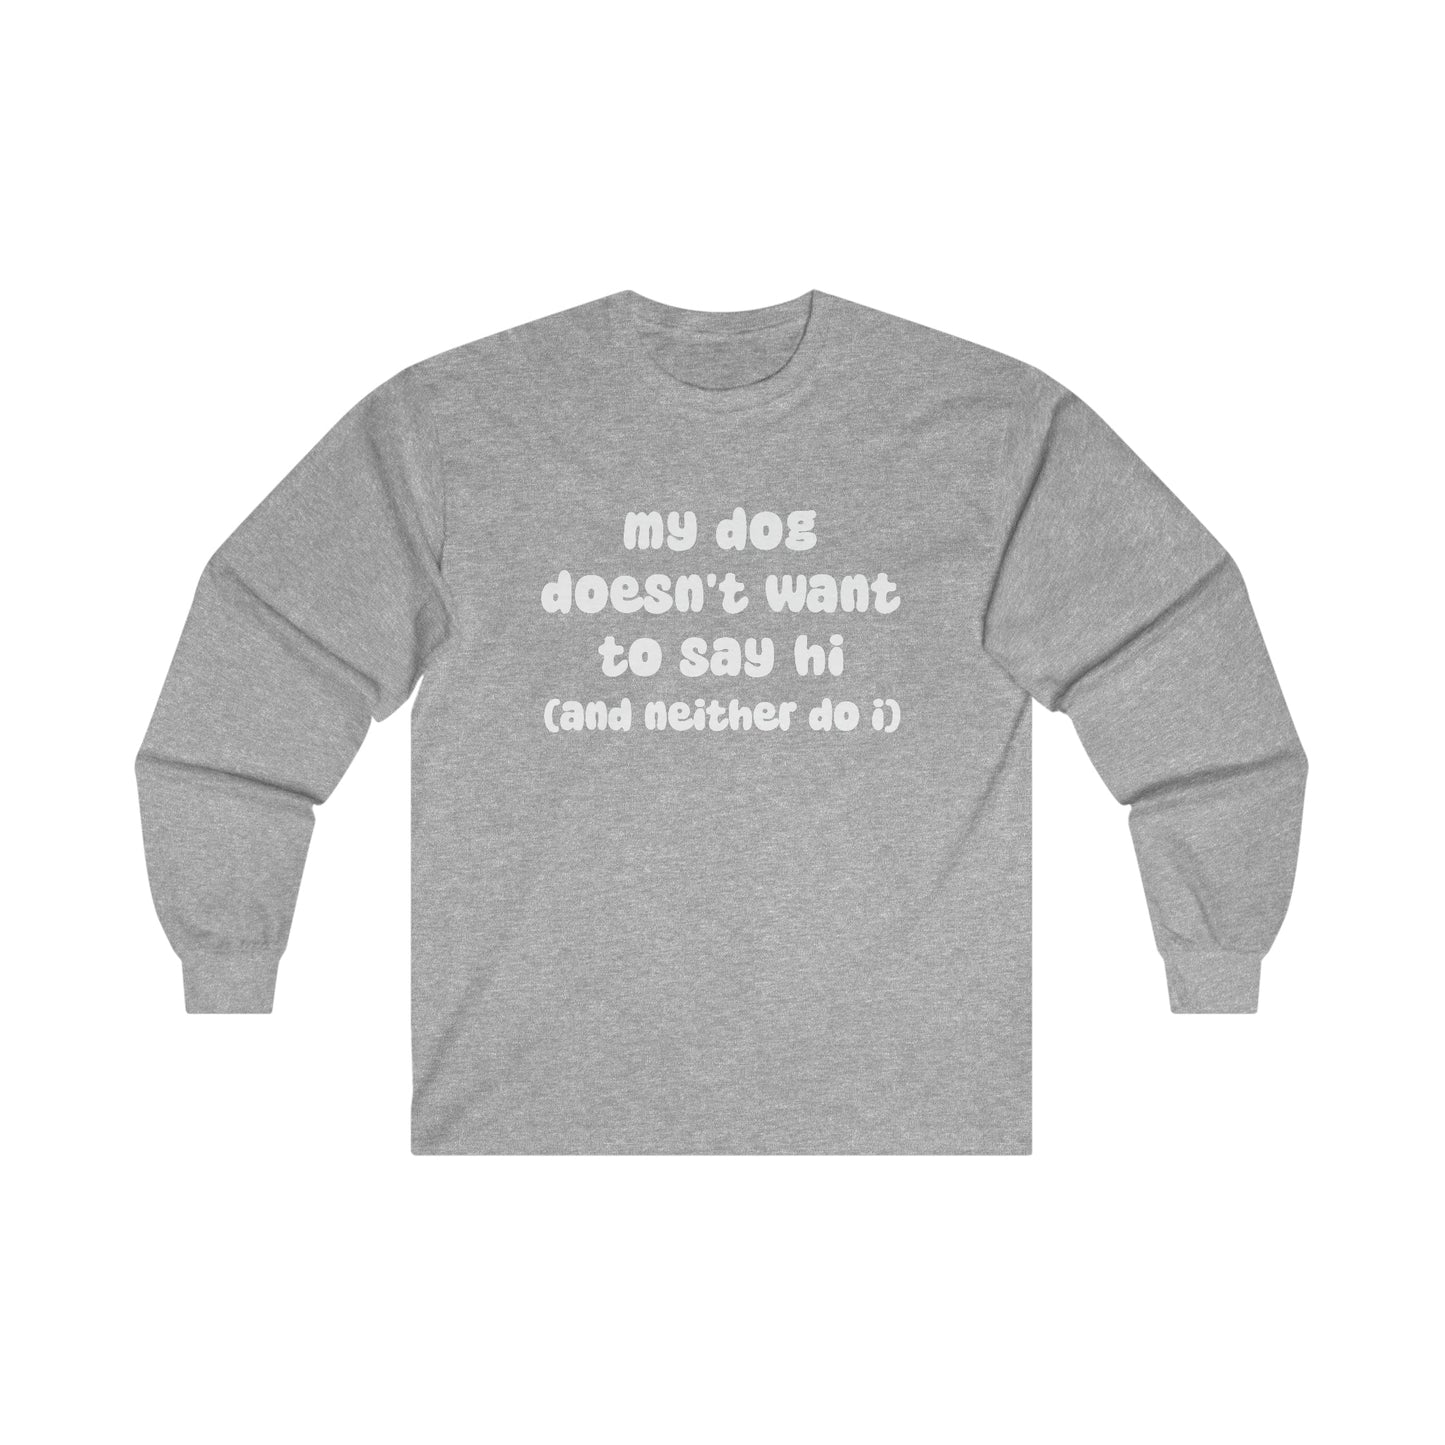 My Dog Doesn't Want To Say Hi (And Neither Do I) | Long Sleeve Tee - Detezi Designs-28563748066068897140